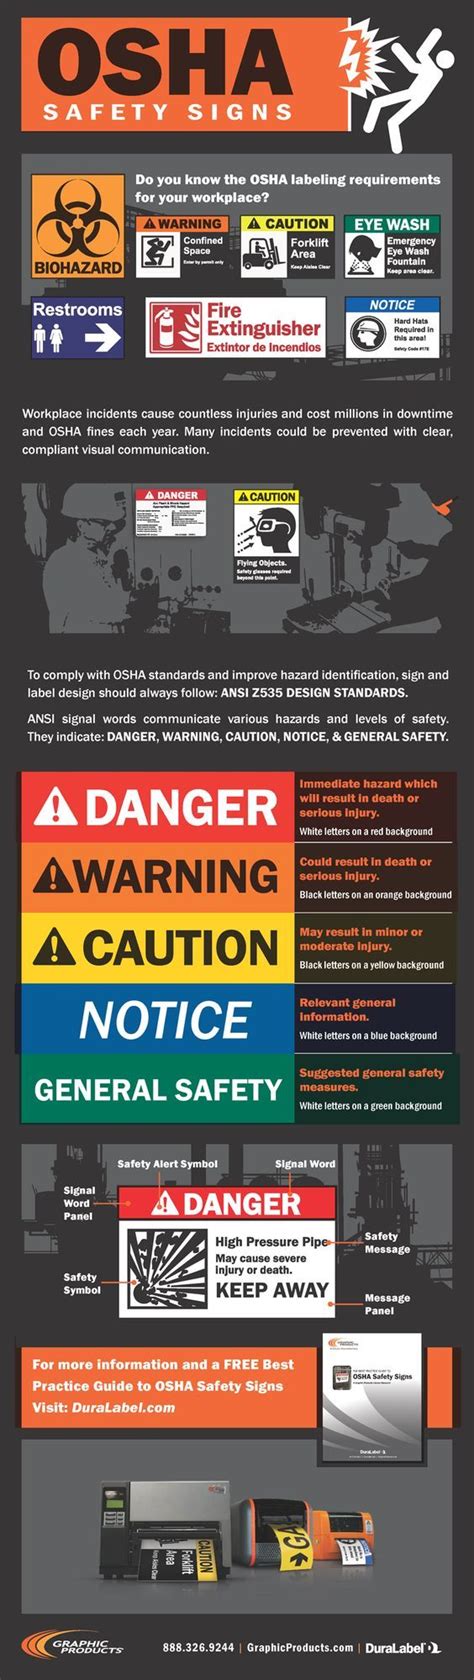 Osha Safety Signs Occupational Health And Safety Workplace Safety